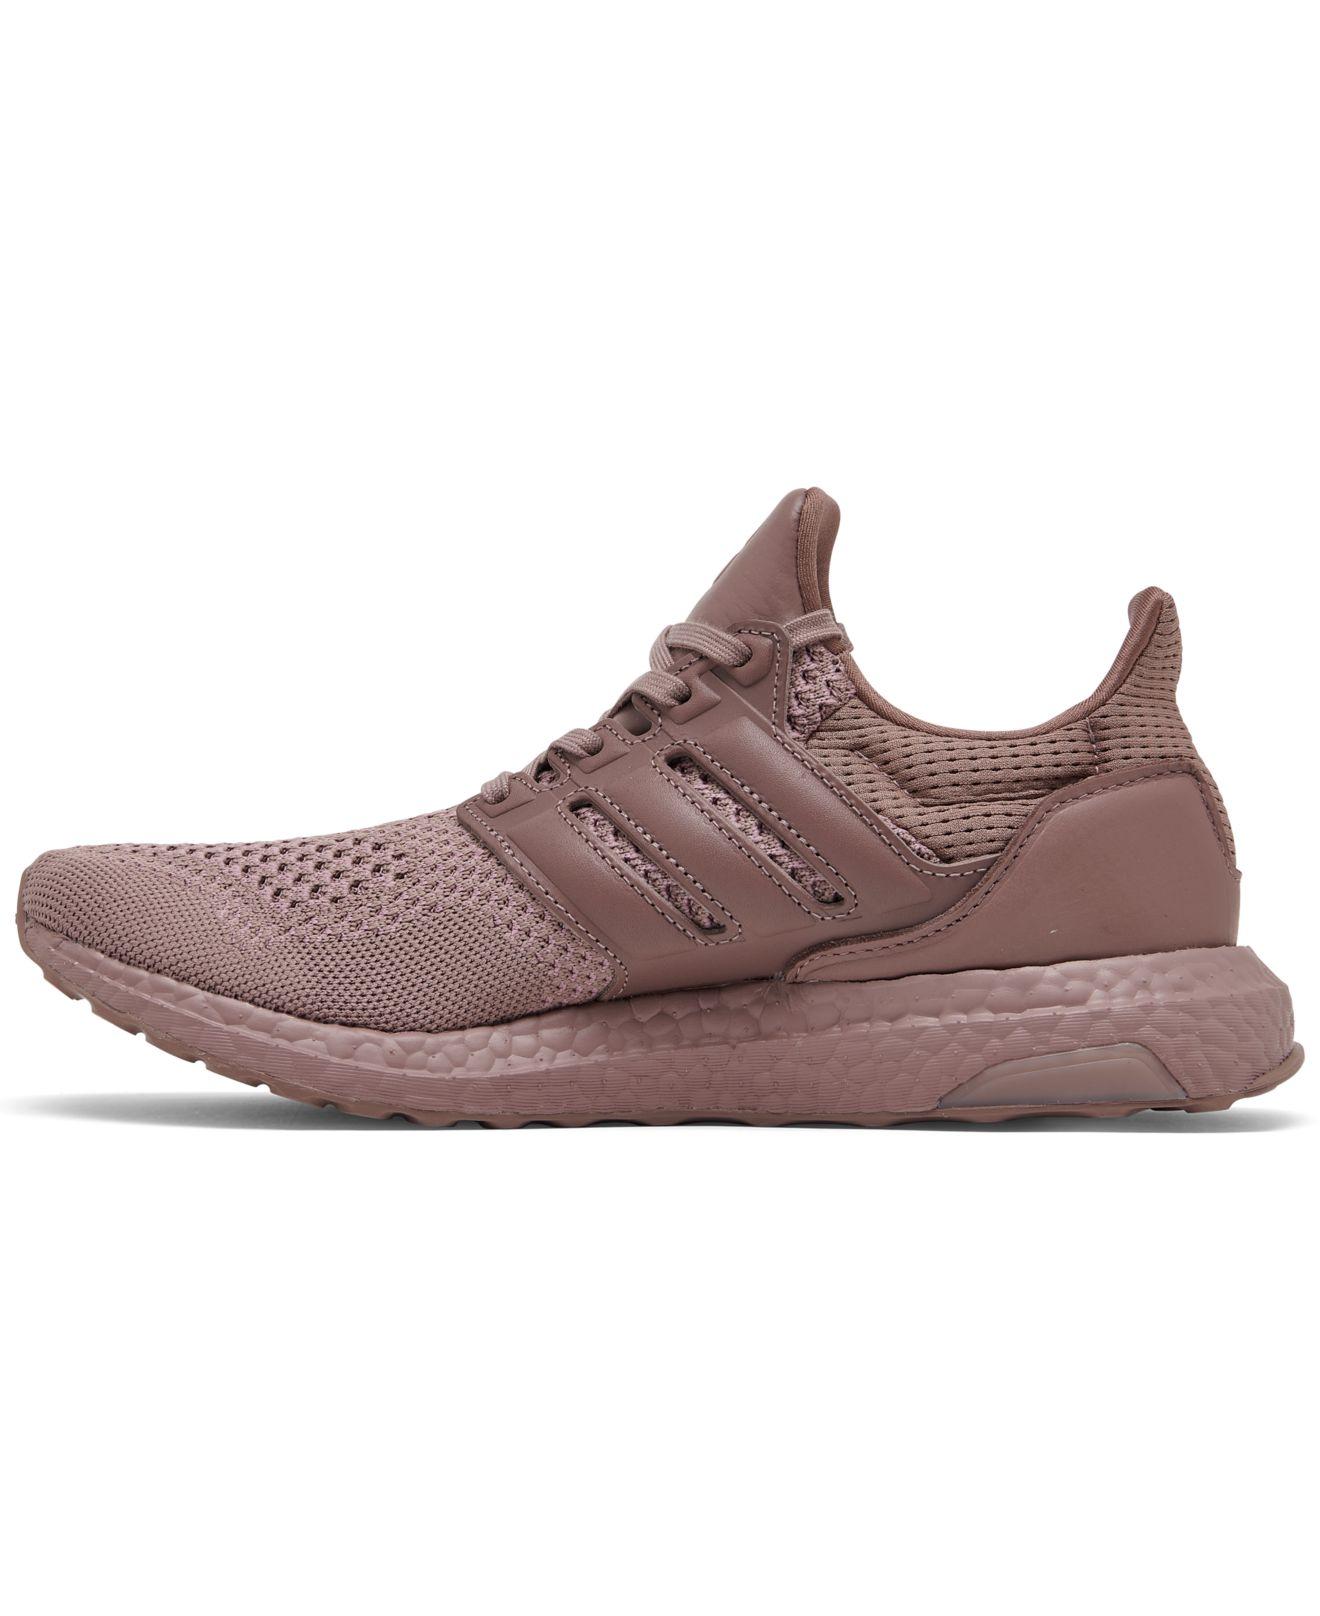 adidas Ultraboost 1.0 Dna Running Sneakers From Finish Line in Brown | Lyst